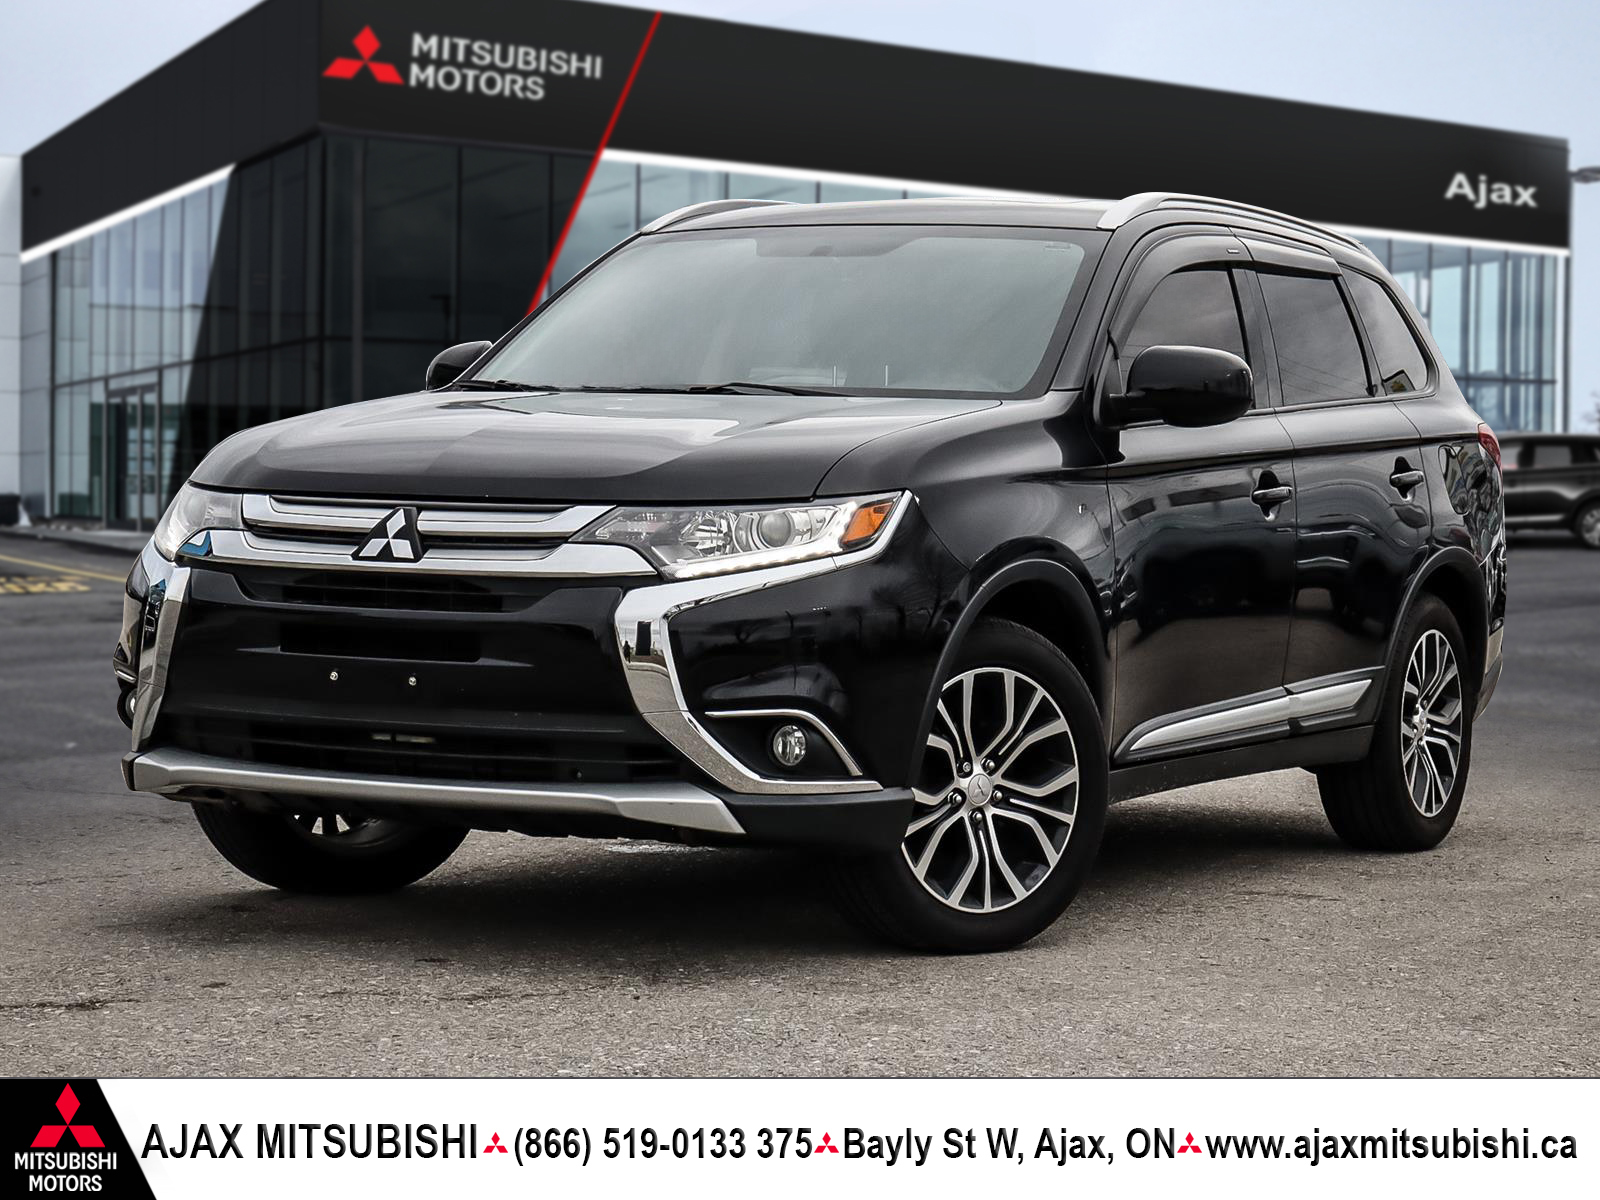 2017 Mitsubishi Outlander ES- Touring Edition, Heated Seats, Sunroof and 18A